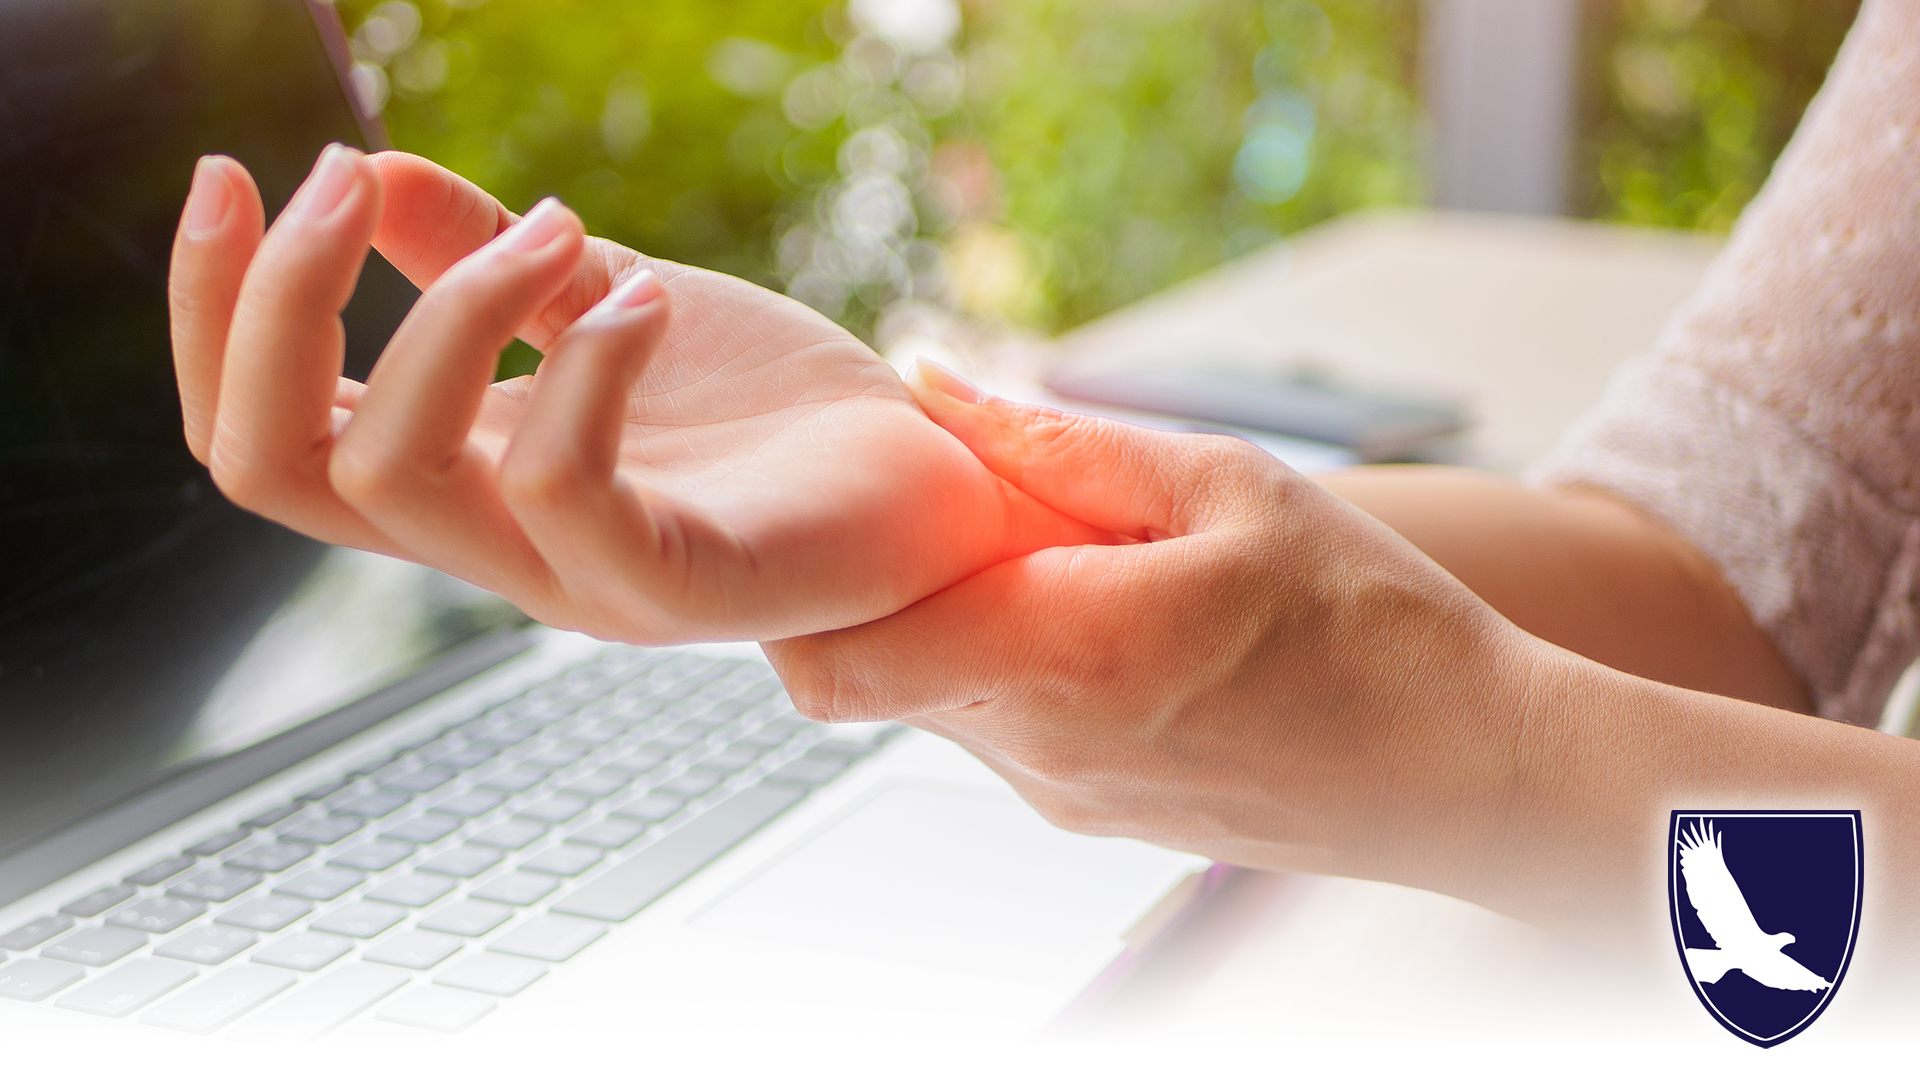 CAN I GET SSDI OR SSI DISABILITY FOR MY CARPAL TUNNEL SYNDROME